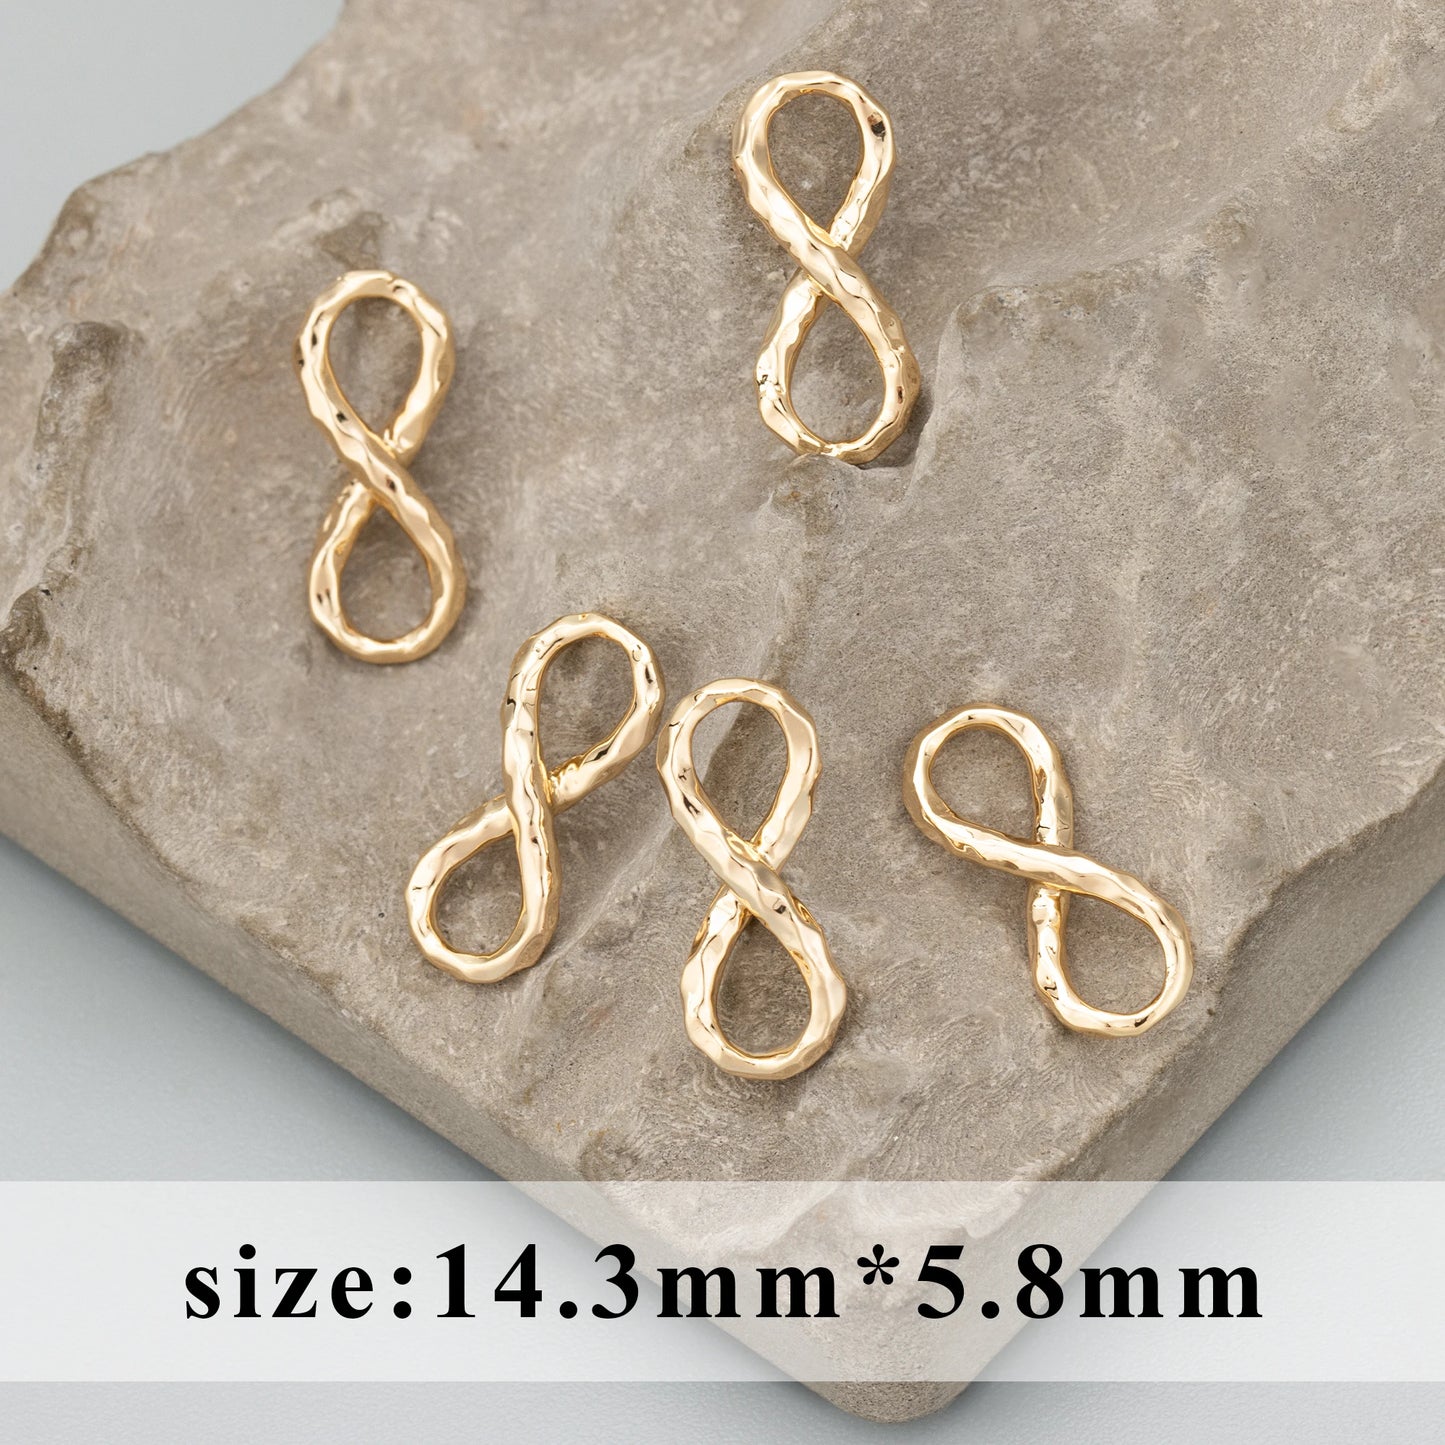 GUFEATHER MD65,jewelry accessories,18k gold rhodium plated,copper,charm,handmade,diy pendants,connector,jewelry making,10pcs/lot